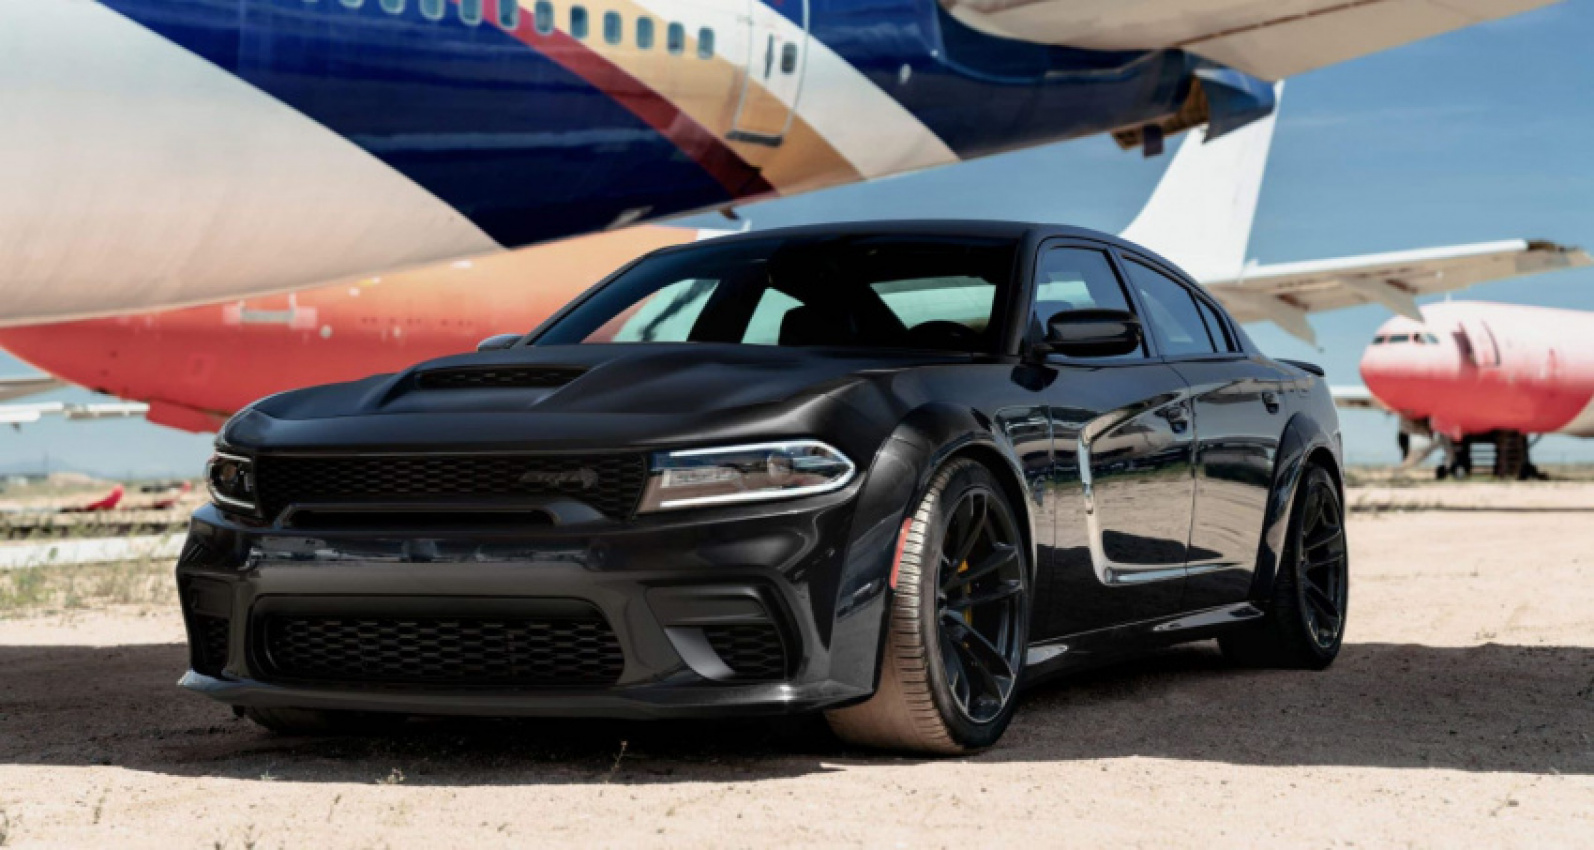 autos, cars, dodge, charger, limited edition, is the 2022 dodge charger jailbreak really worth nearly $90k?